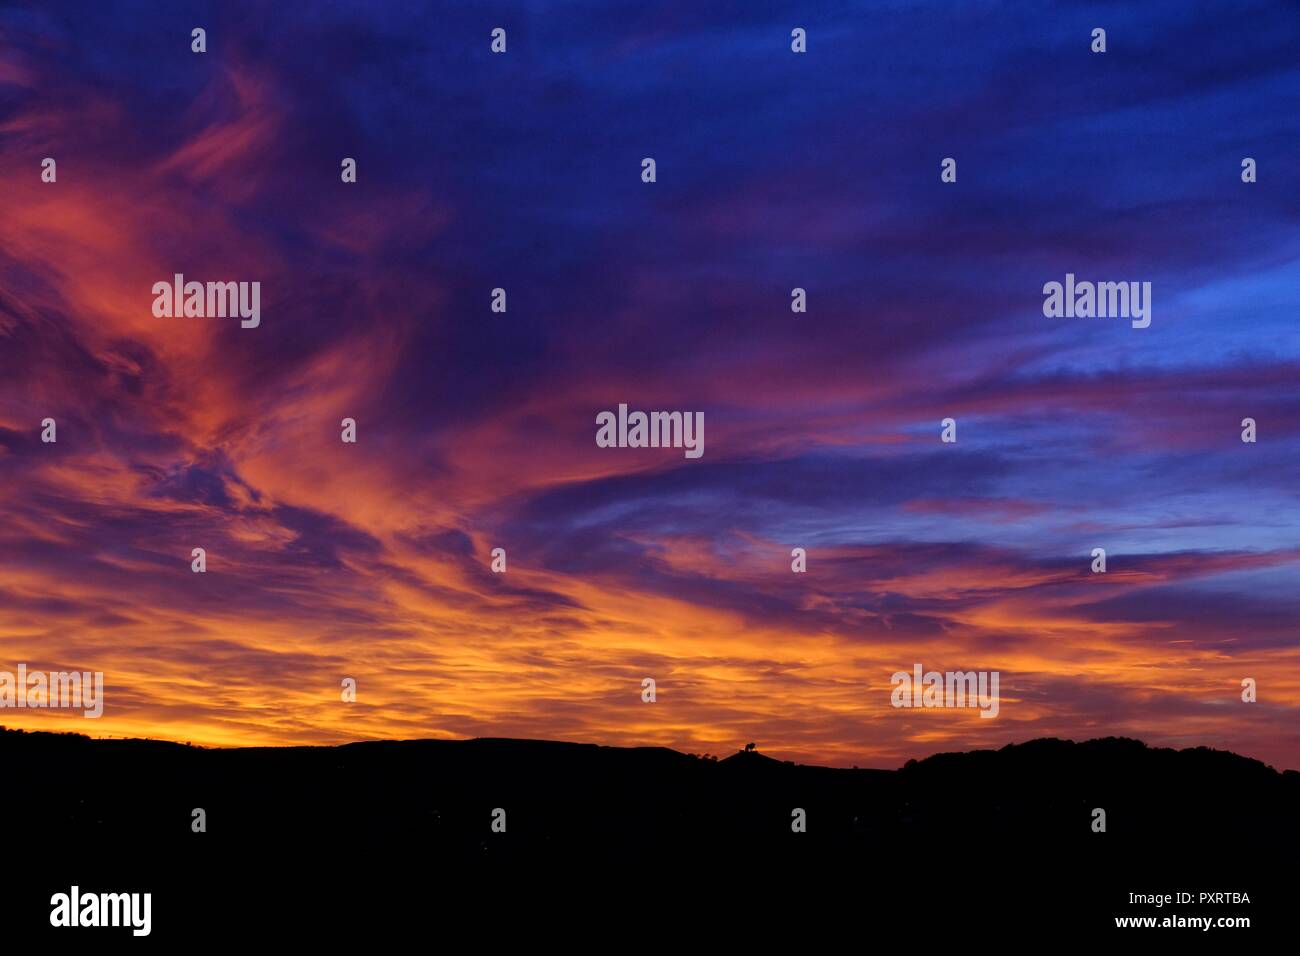 Bridport, Dorset, UK -23 October 2018. As the cold weather draws I and the days get shorter the town of Bridport in Dorset is treated to a spectacular sunset. Credit: Tom Corban/Alamy Live News Stock Photo